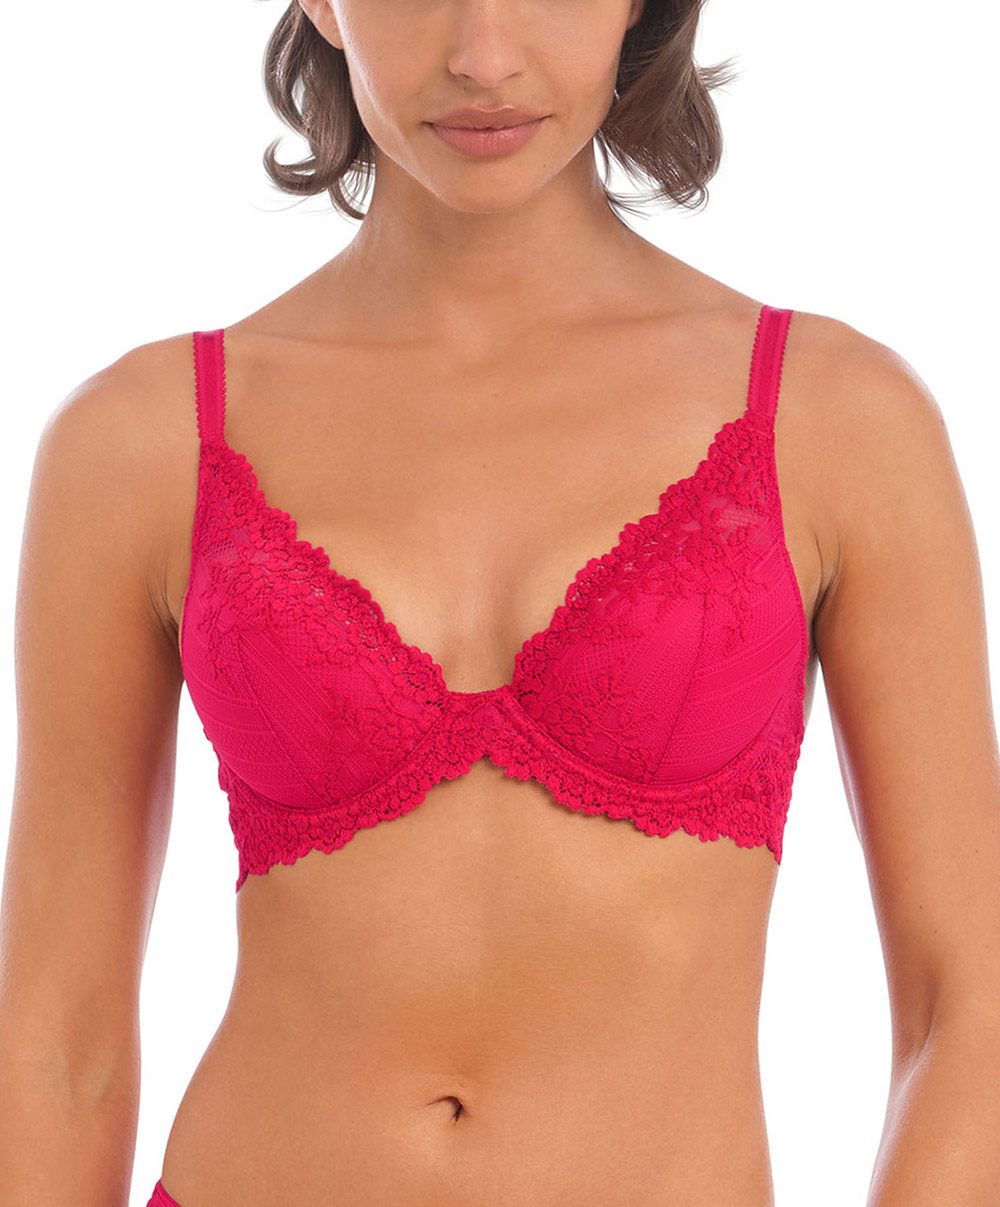 Triangle plunge bra with wires Embrace Lace persian red WACOAL